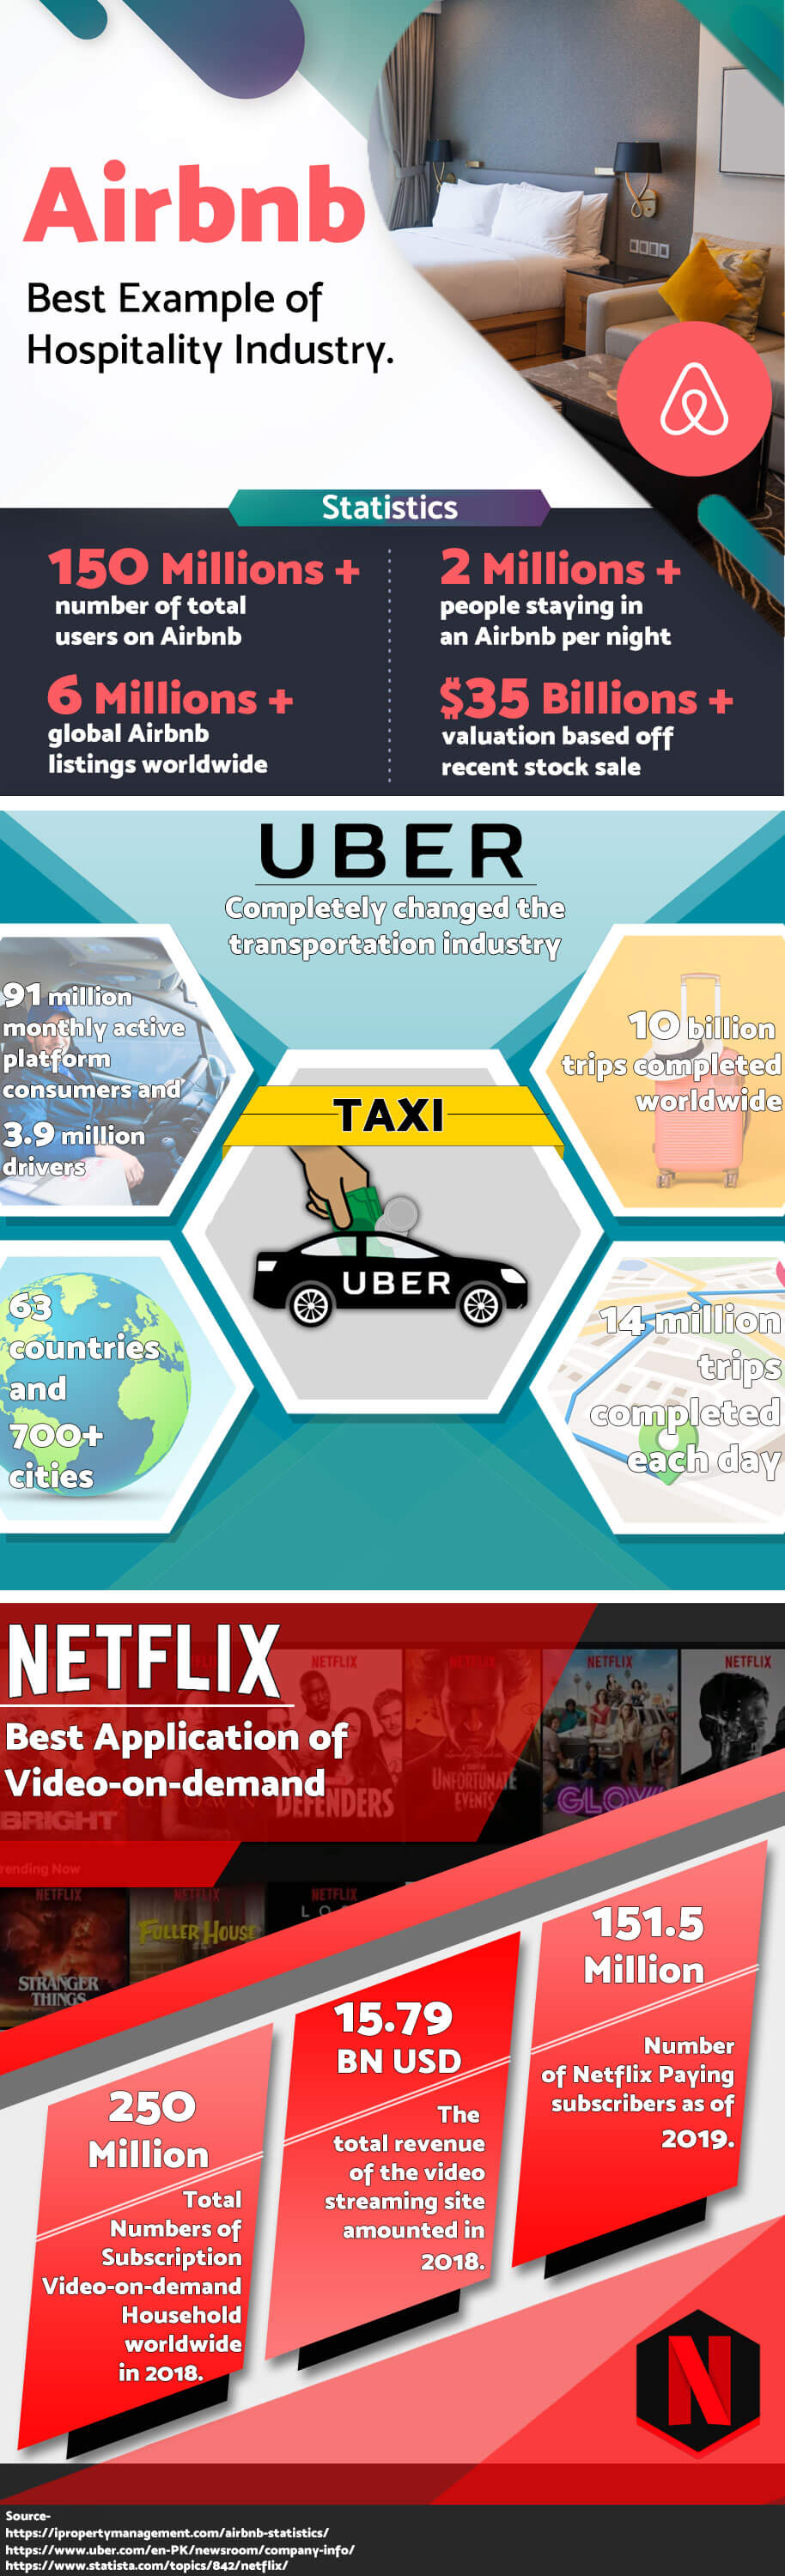 On-demand-Apps-Netflix,Uber,Airbnb-Auxano-global-services